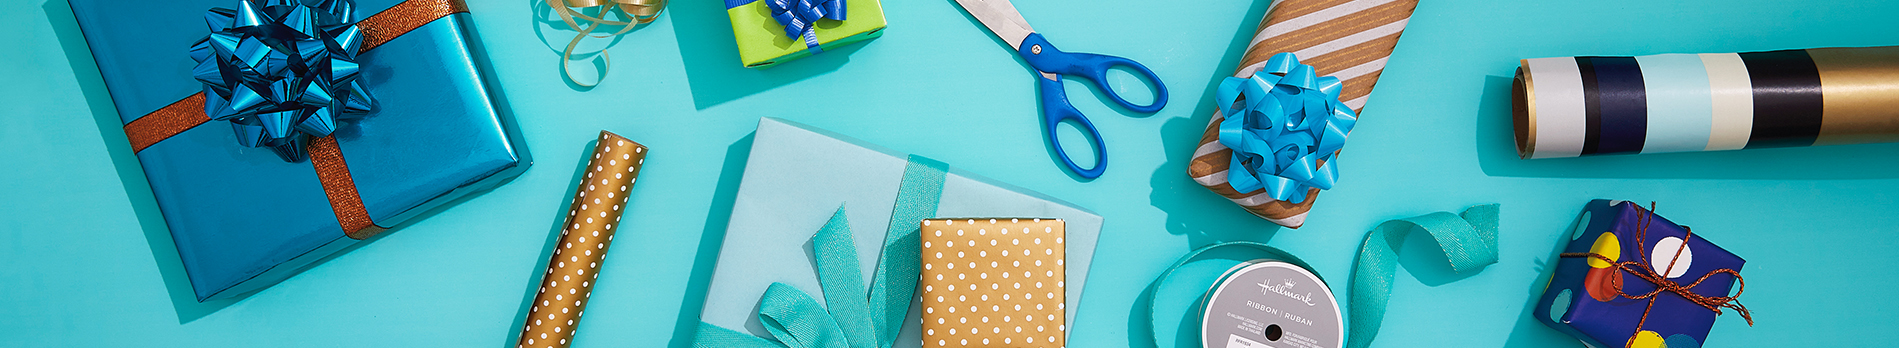 Gift wrapping supplies on a bright aqua background.